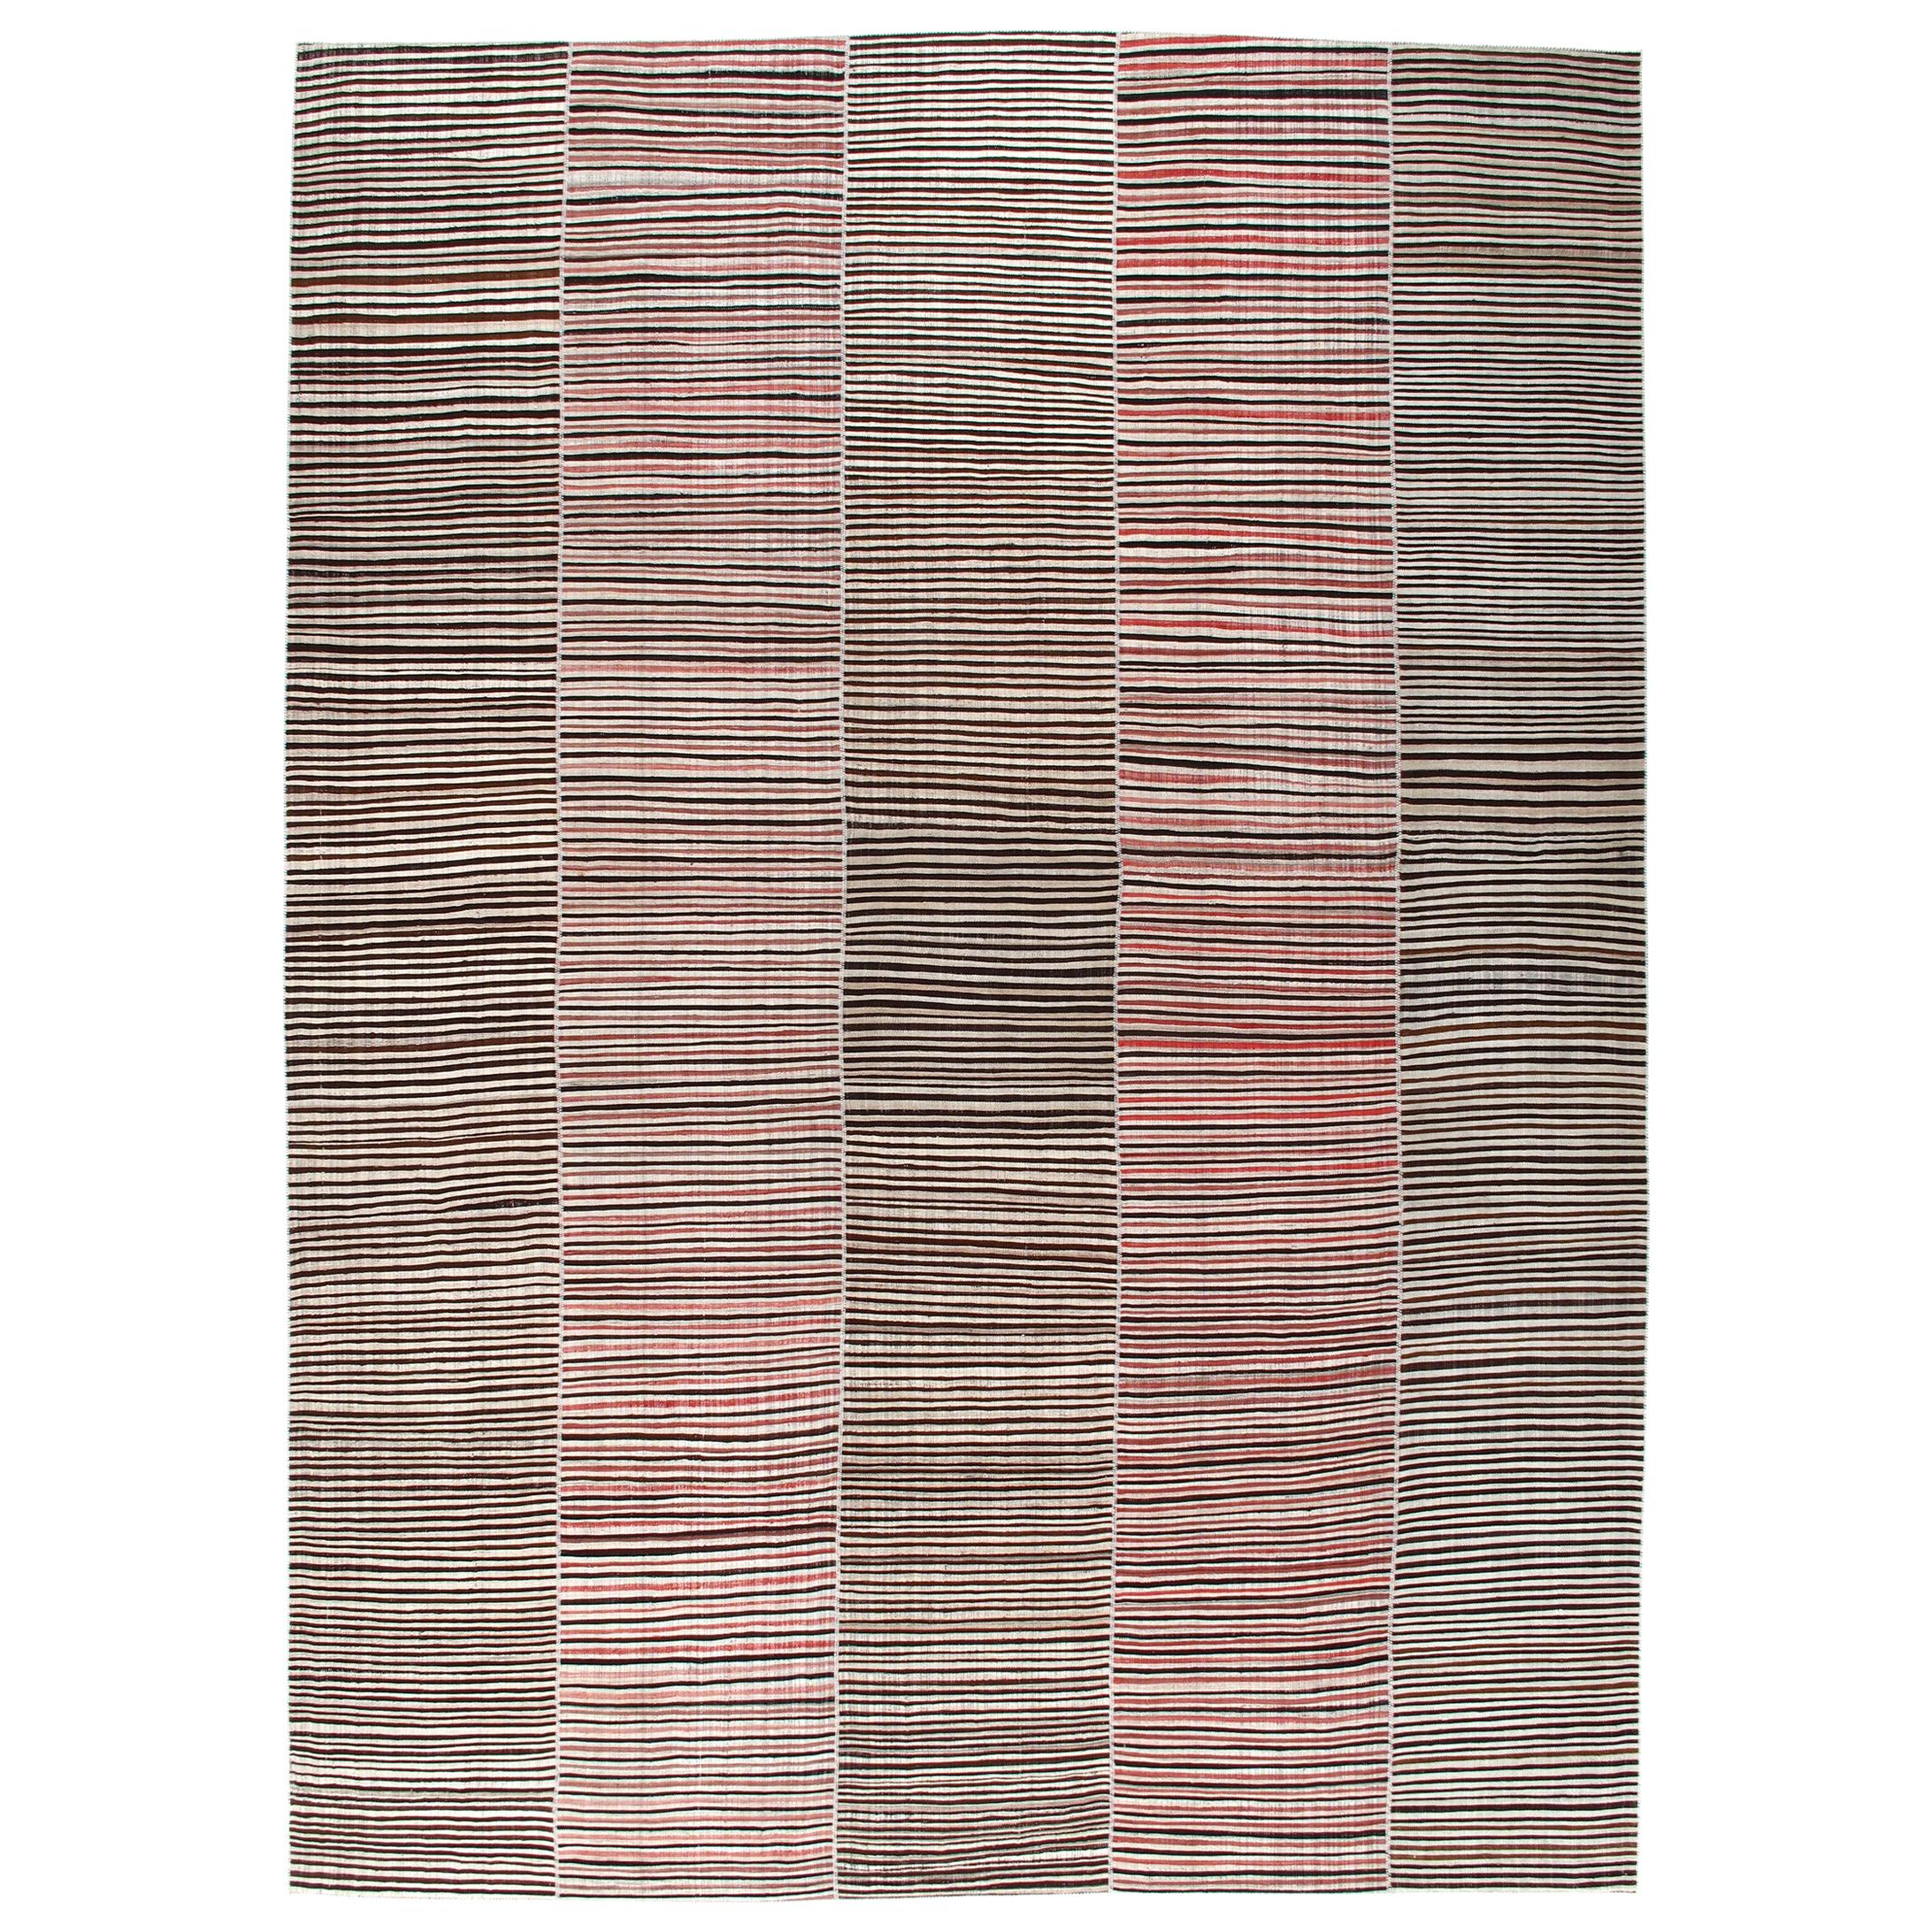 Vintage Persian Mazandaran Handwoven Flat-Weave Rug in Brown and Red Stripes For Sale